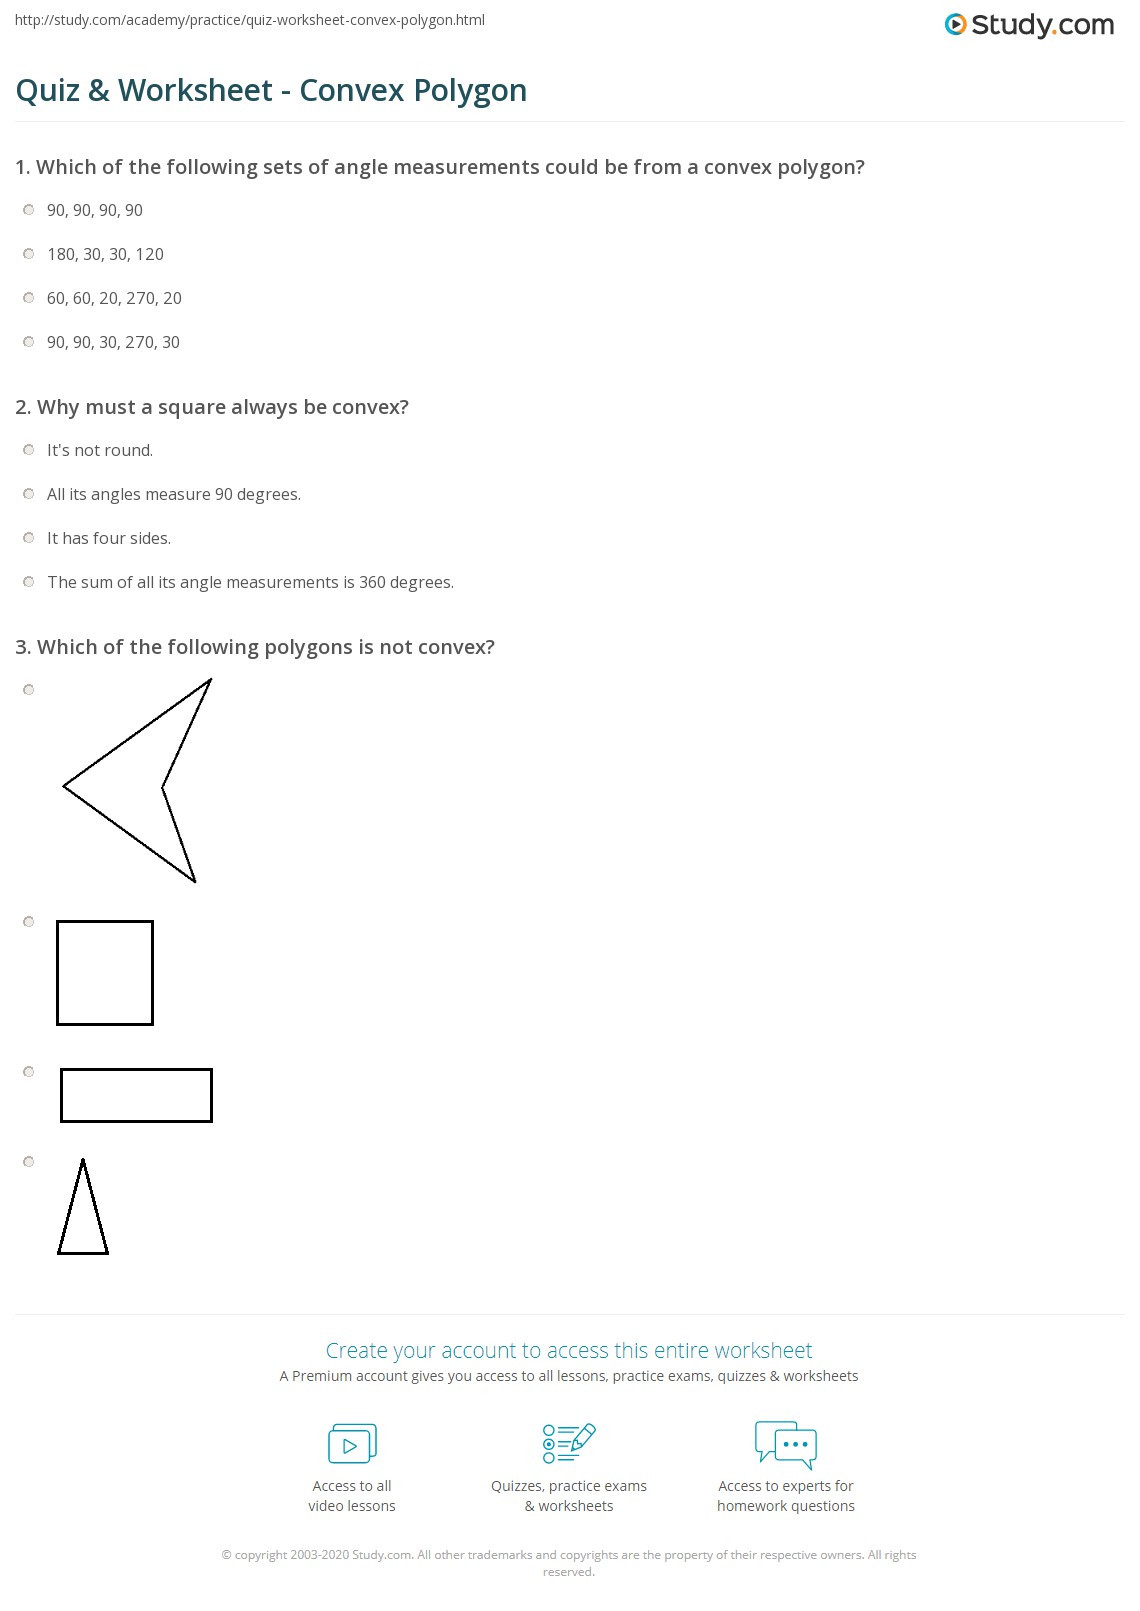 Polygon and Angles Worksheet Quiz &amp; Worksheet Convex Polygon